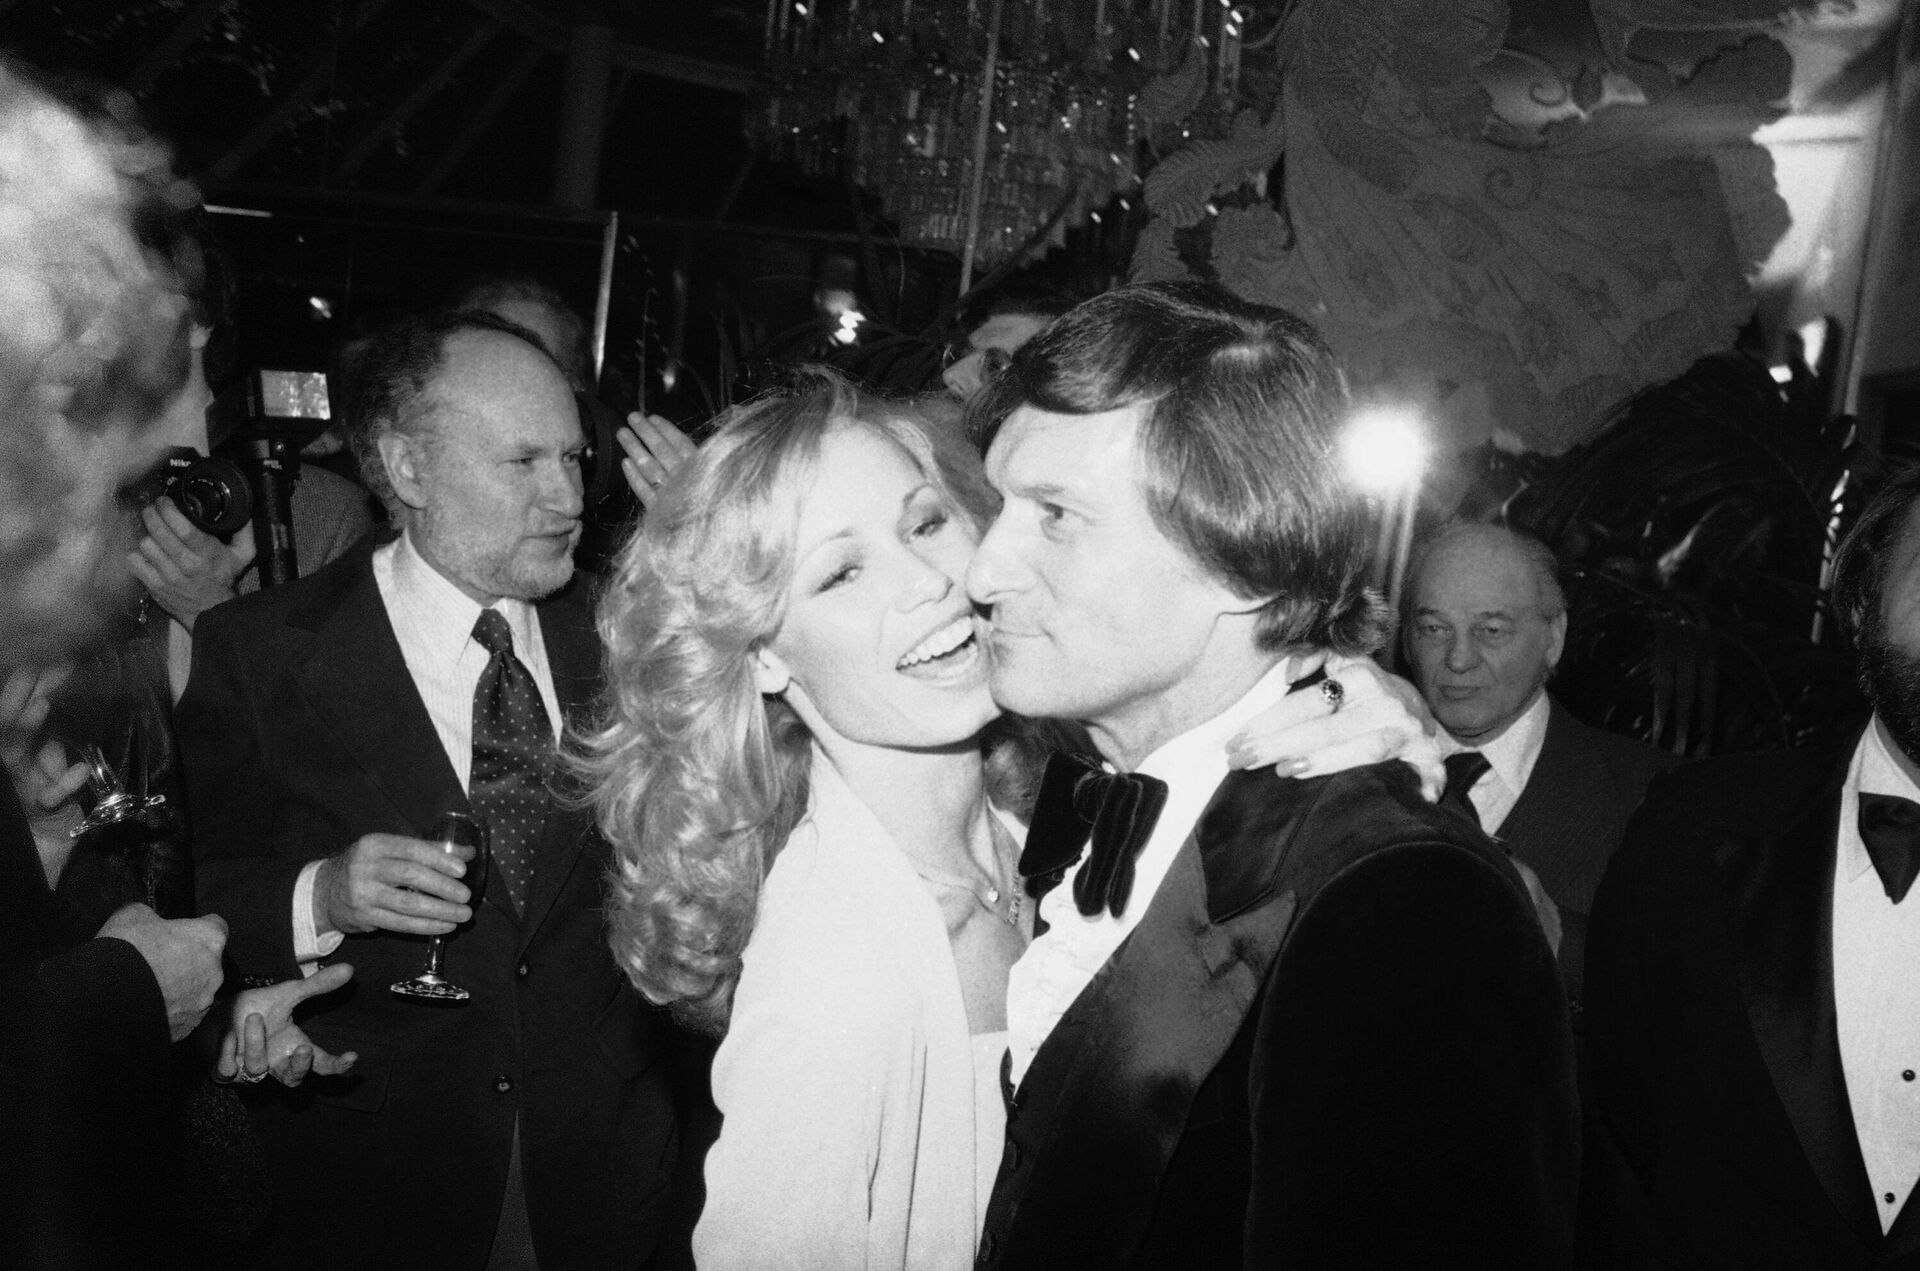 Playboy Magazine publisher Hugh Hefner, right, is embraced by his girlfriend Sandra Theodore, left, at Tavern on the Green Restaurant, Thursday, Jan. 11, 1979, New York. The two were attending a party celebrating the 25th anniversary of the publication. - Sputnik International, 1920, 09.01.2022